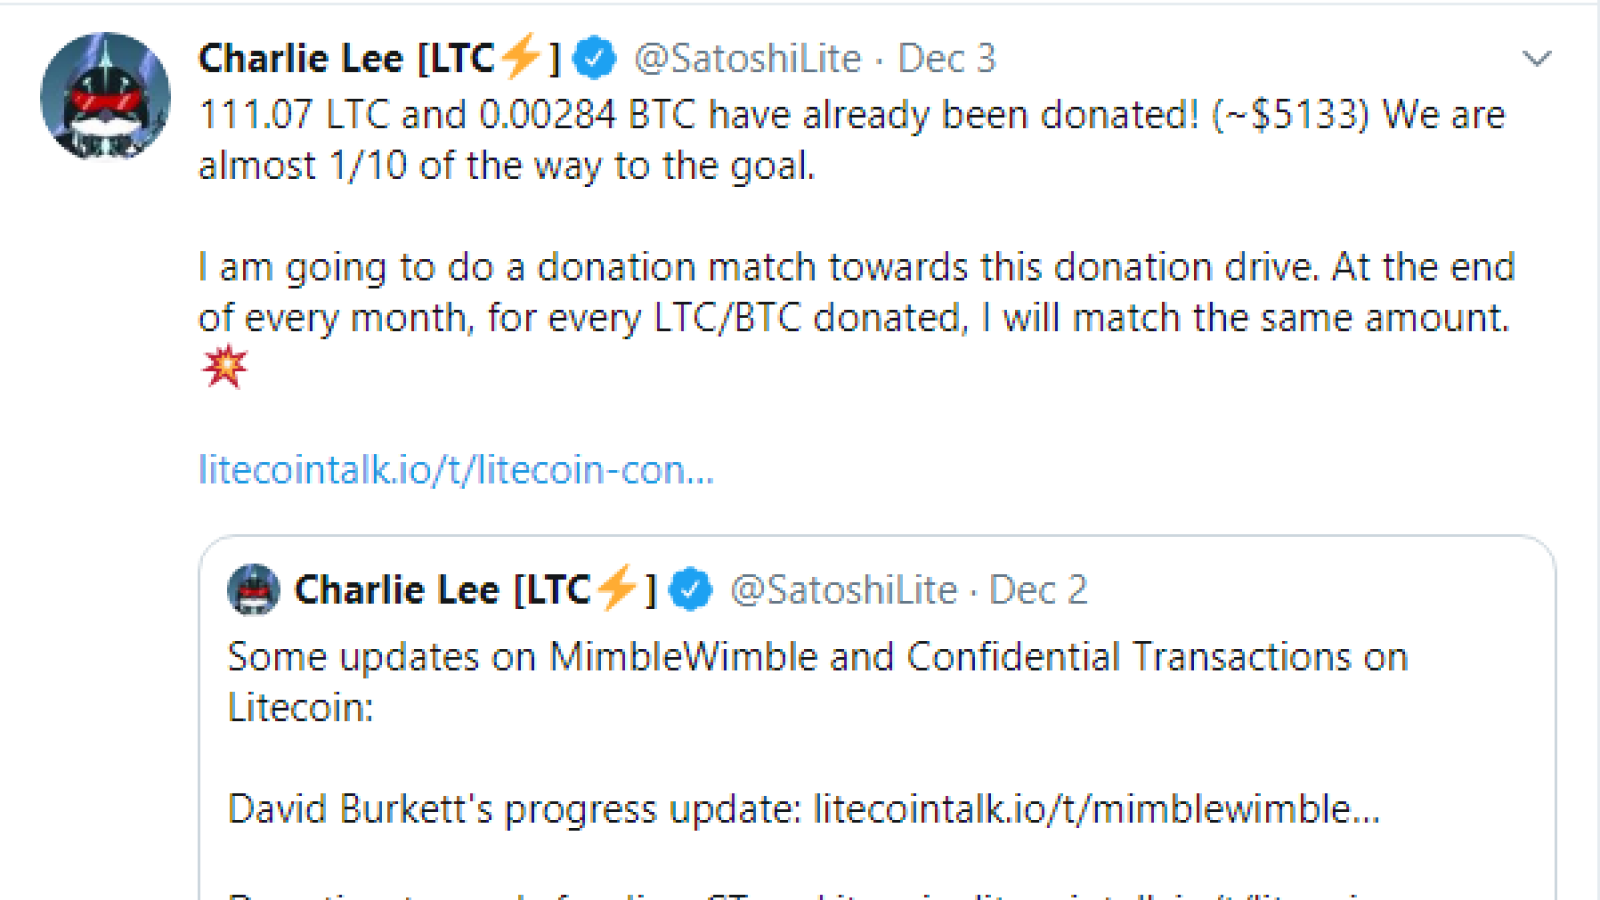 Charlie Lee Will Redouble Every Donation For MW Implementation